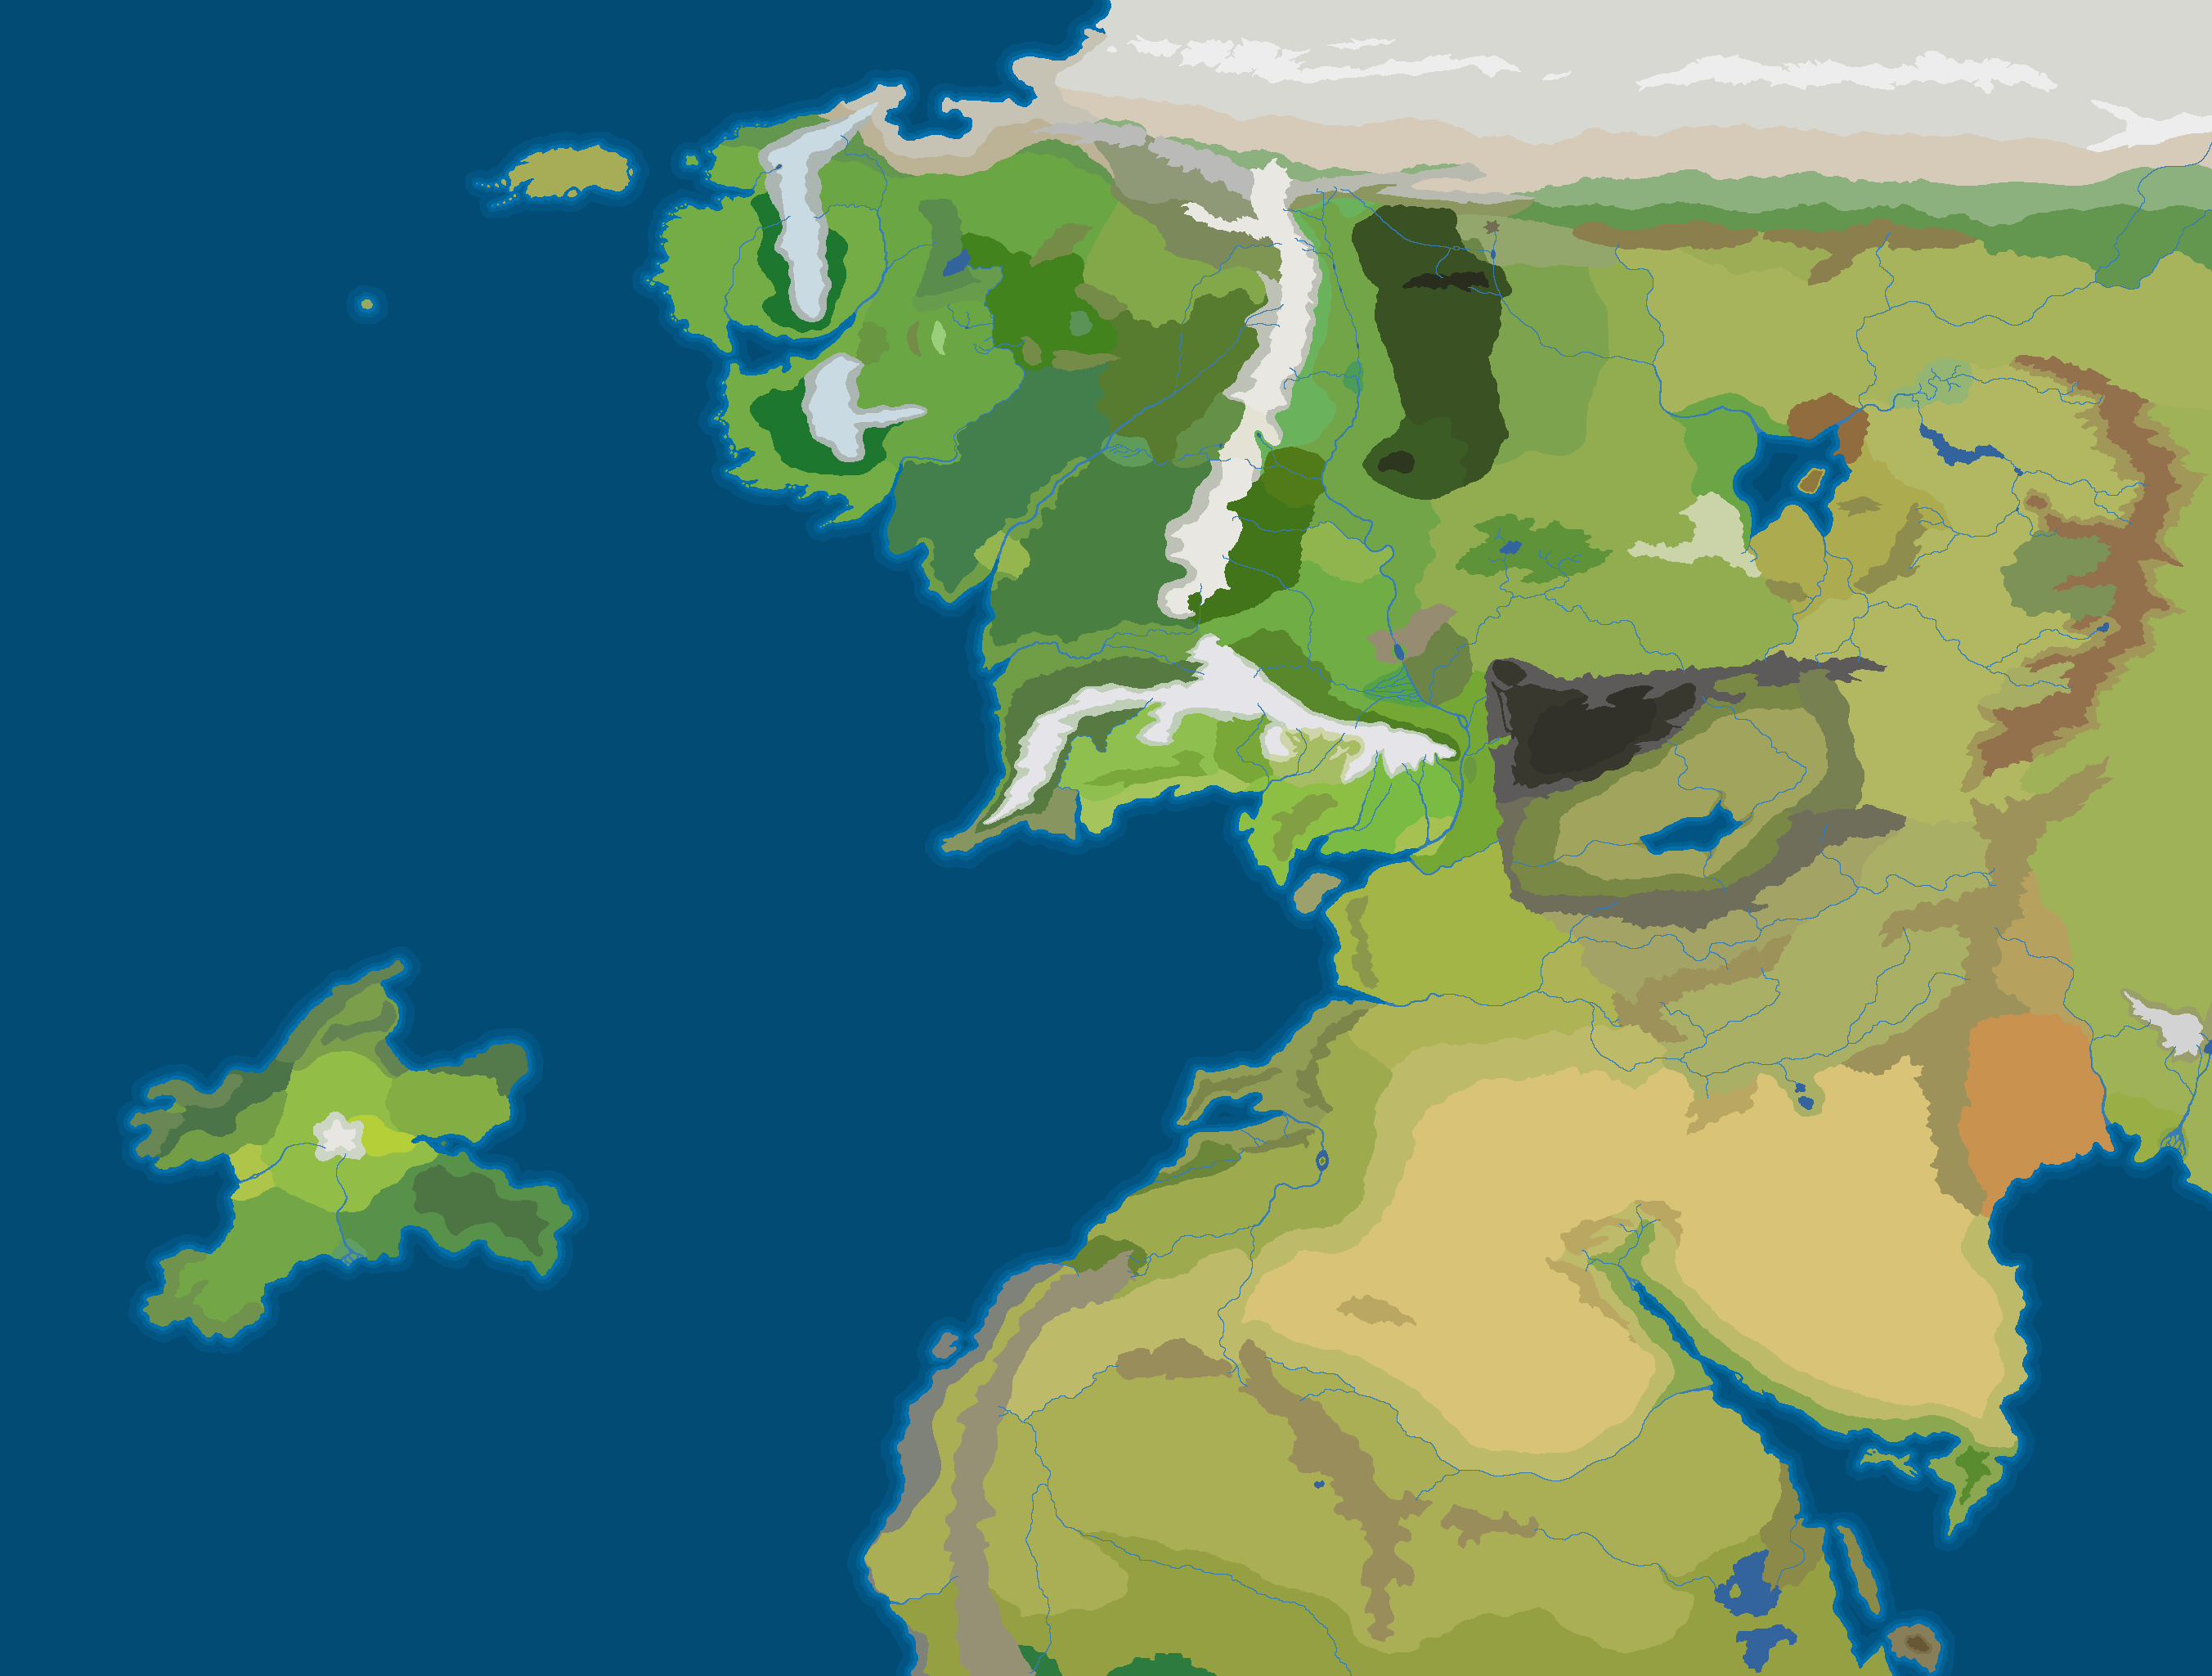 Beleriand - First Age Minecraft Map